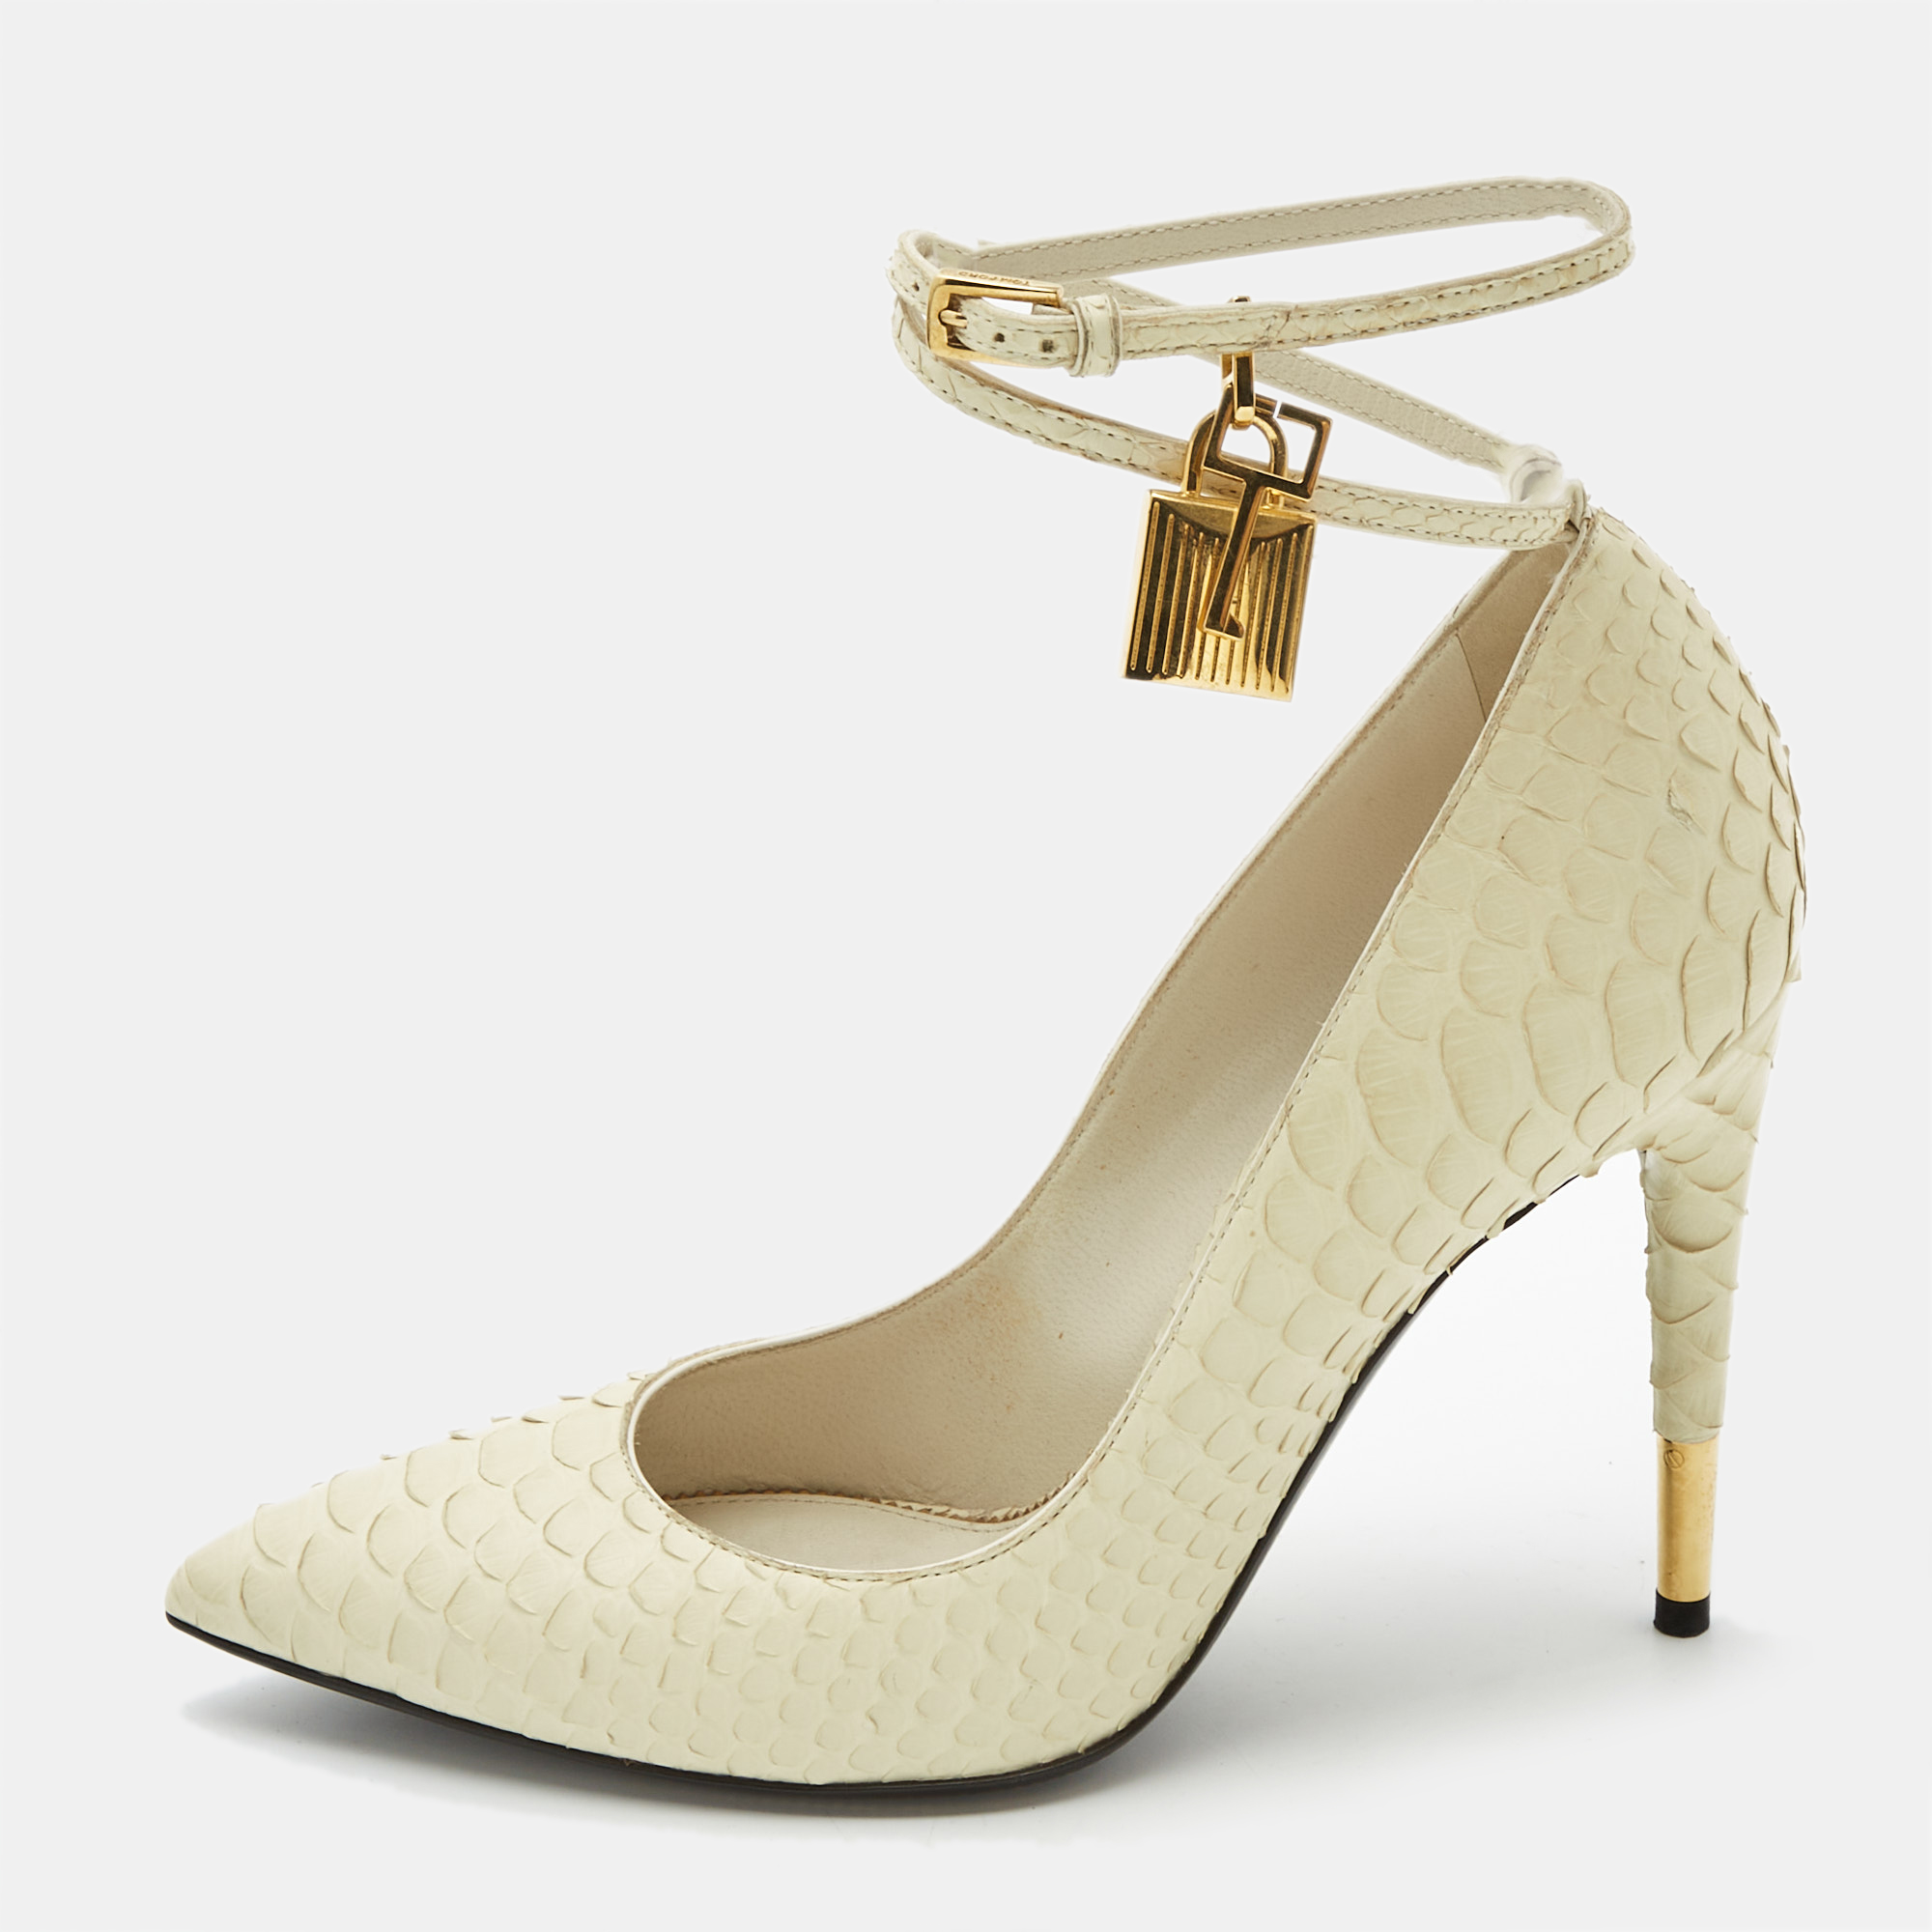 Tom ford white python leather padlock pumps size 37.5